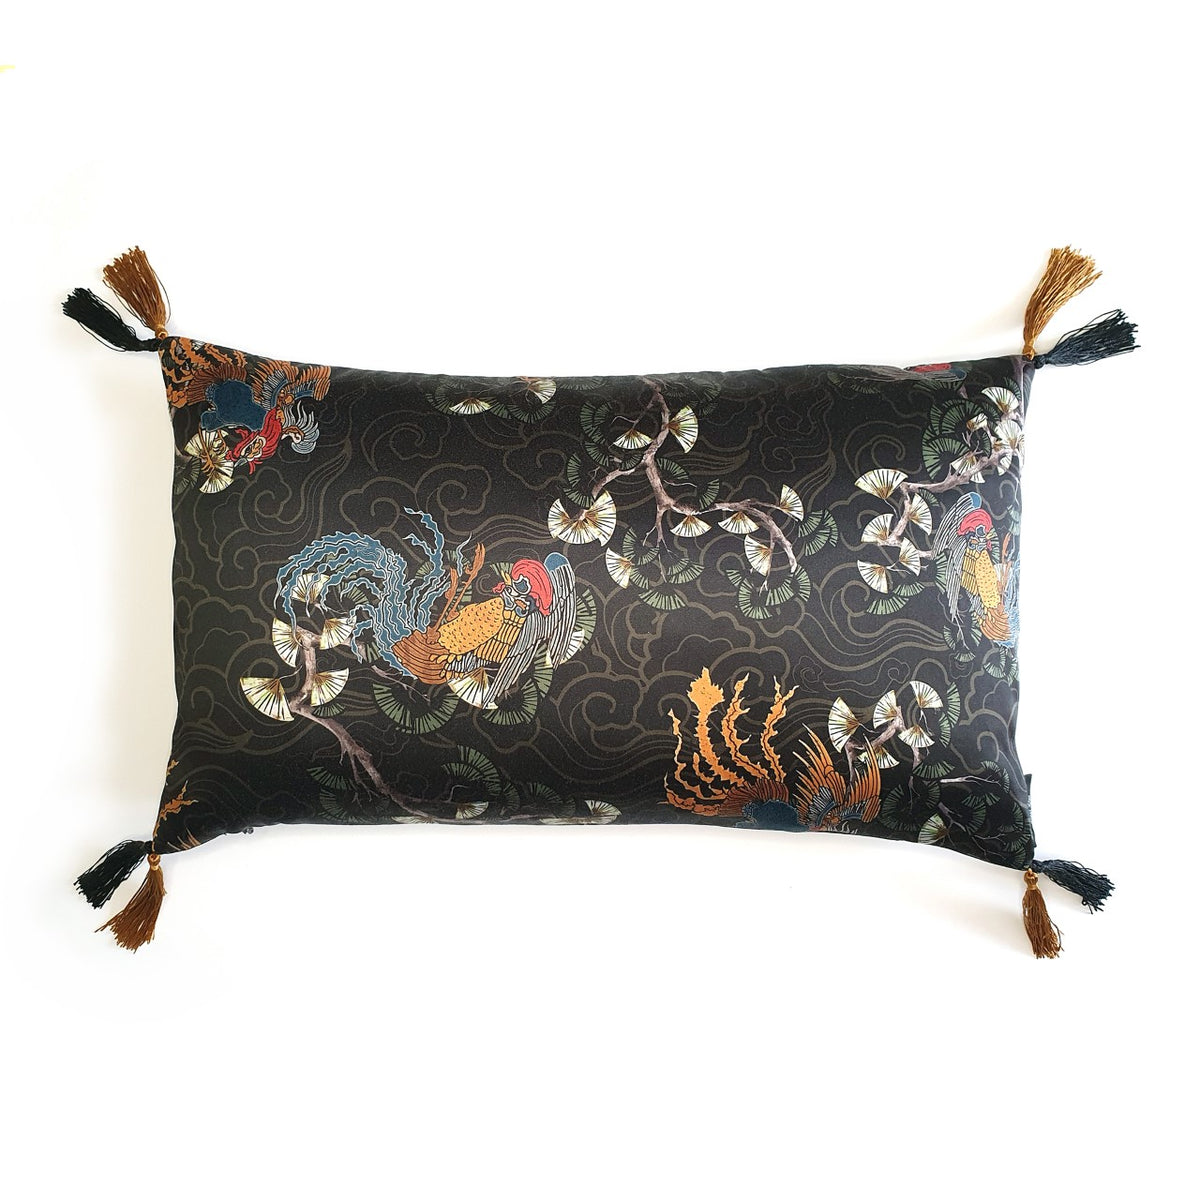 Oriental Print Rectangle Tassel Cushion Handmade oriental print silky (polyester) cushion with contrast silky double tassels, approximately 12" x 20" (30cm x 50cm) with a concealed zip.  Comes with a polycotton cushion inner.